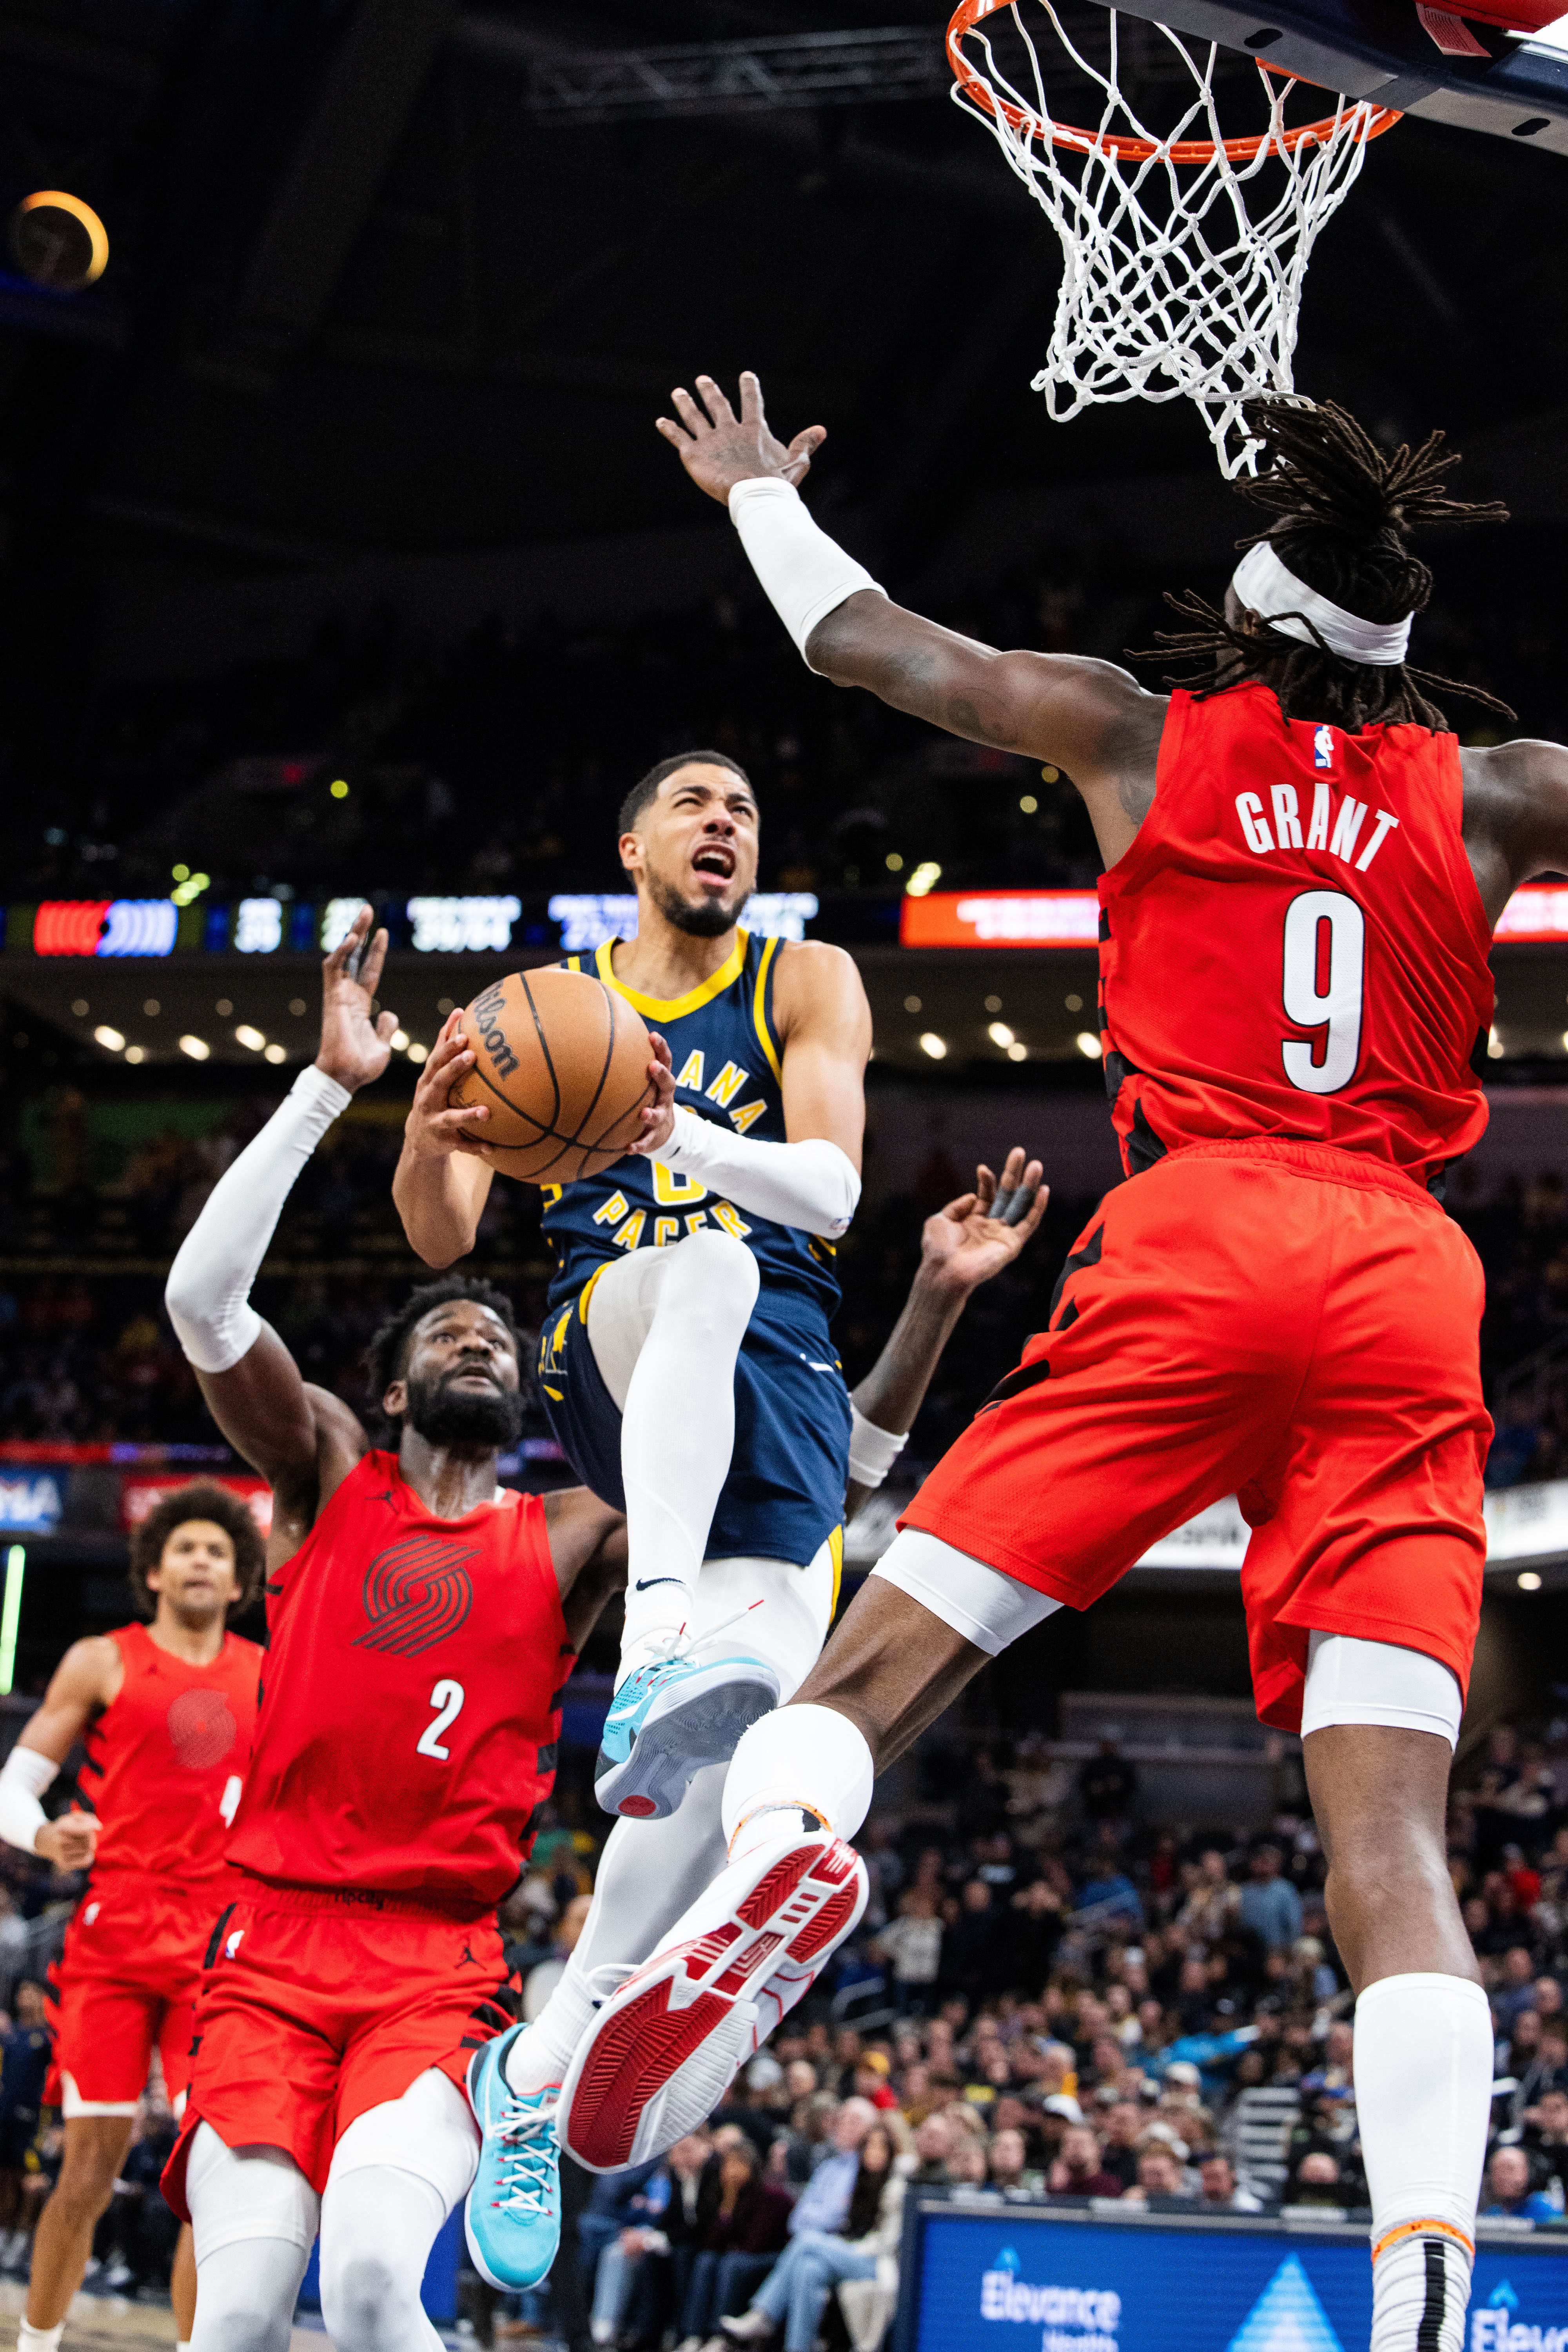 NBA: Portland Trail Blazers at Indiana Pacers